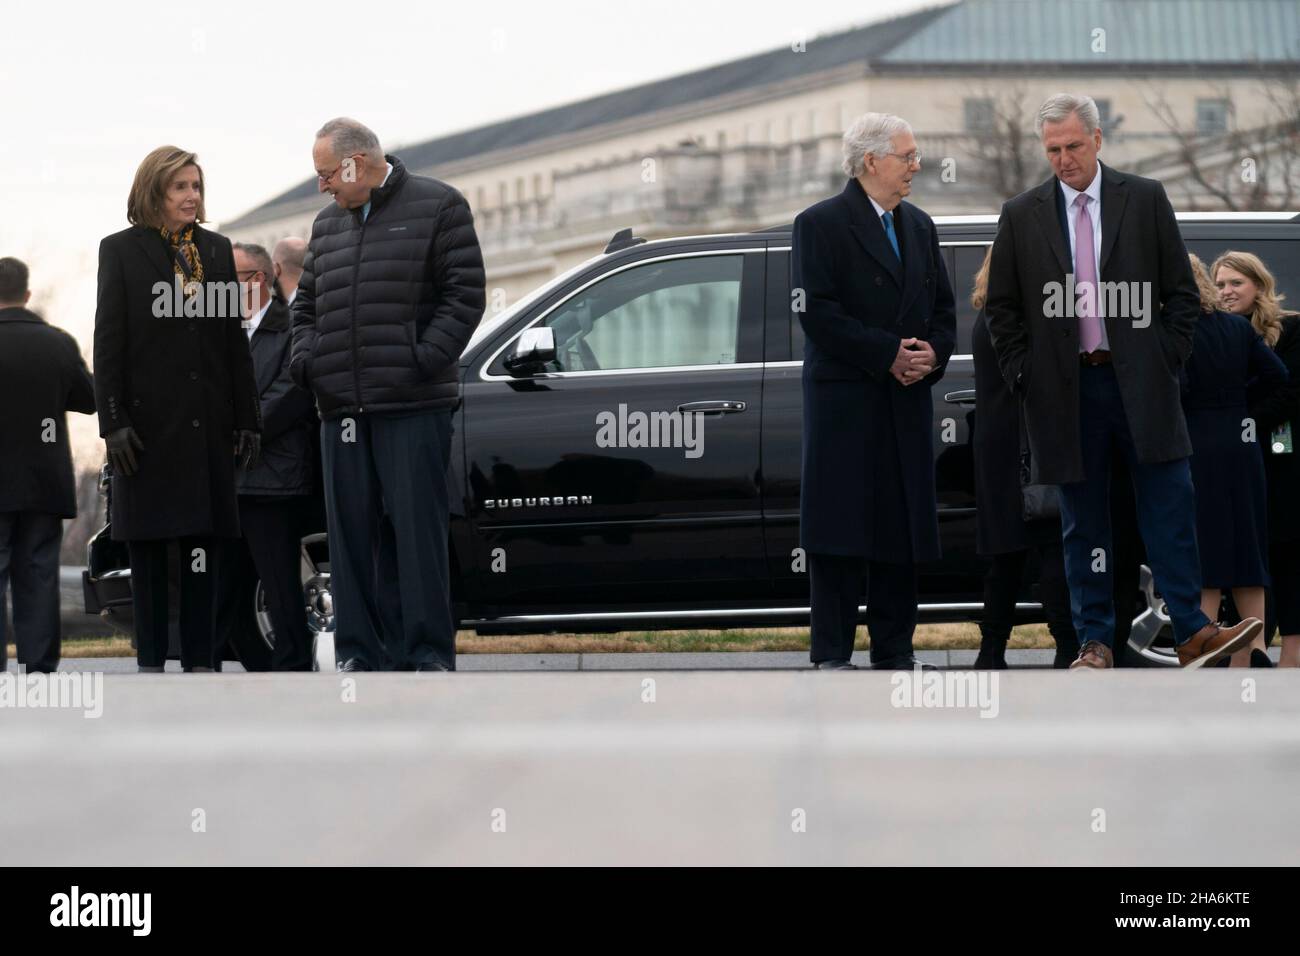 Washington, DC. 10th Dec, 2021. Speaker Nancy Pelosi (D-Calif.), Majority Leader Charles Schumer (D-N.Y.), Minority Leader Mitch McConnell (R-Ky.) and House Minority Leader Kevin McCarthy (R-Calif.) are seen before a military honor guard carries the casket of Sen. Bob Dole (R-Kan.) after lying in state at the U.S. Capitol in Washington, DC, on Friday, December 10, 2021. Dole will be taken to Washington National Cathedral for a funeral service. Credit: Greg Nash/Pool via CNP/dpa/Alamy Live News Stock Photo